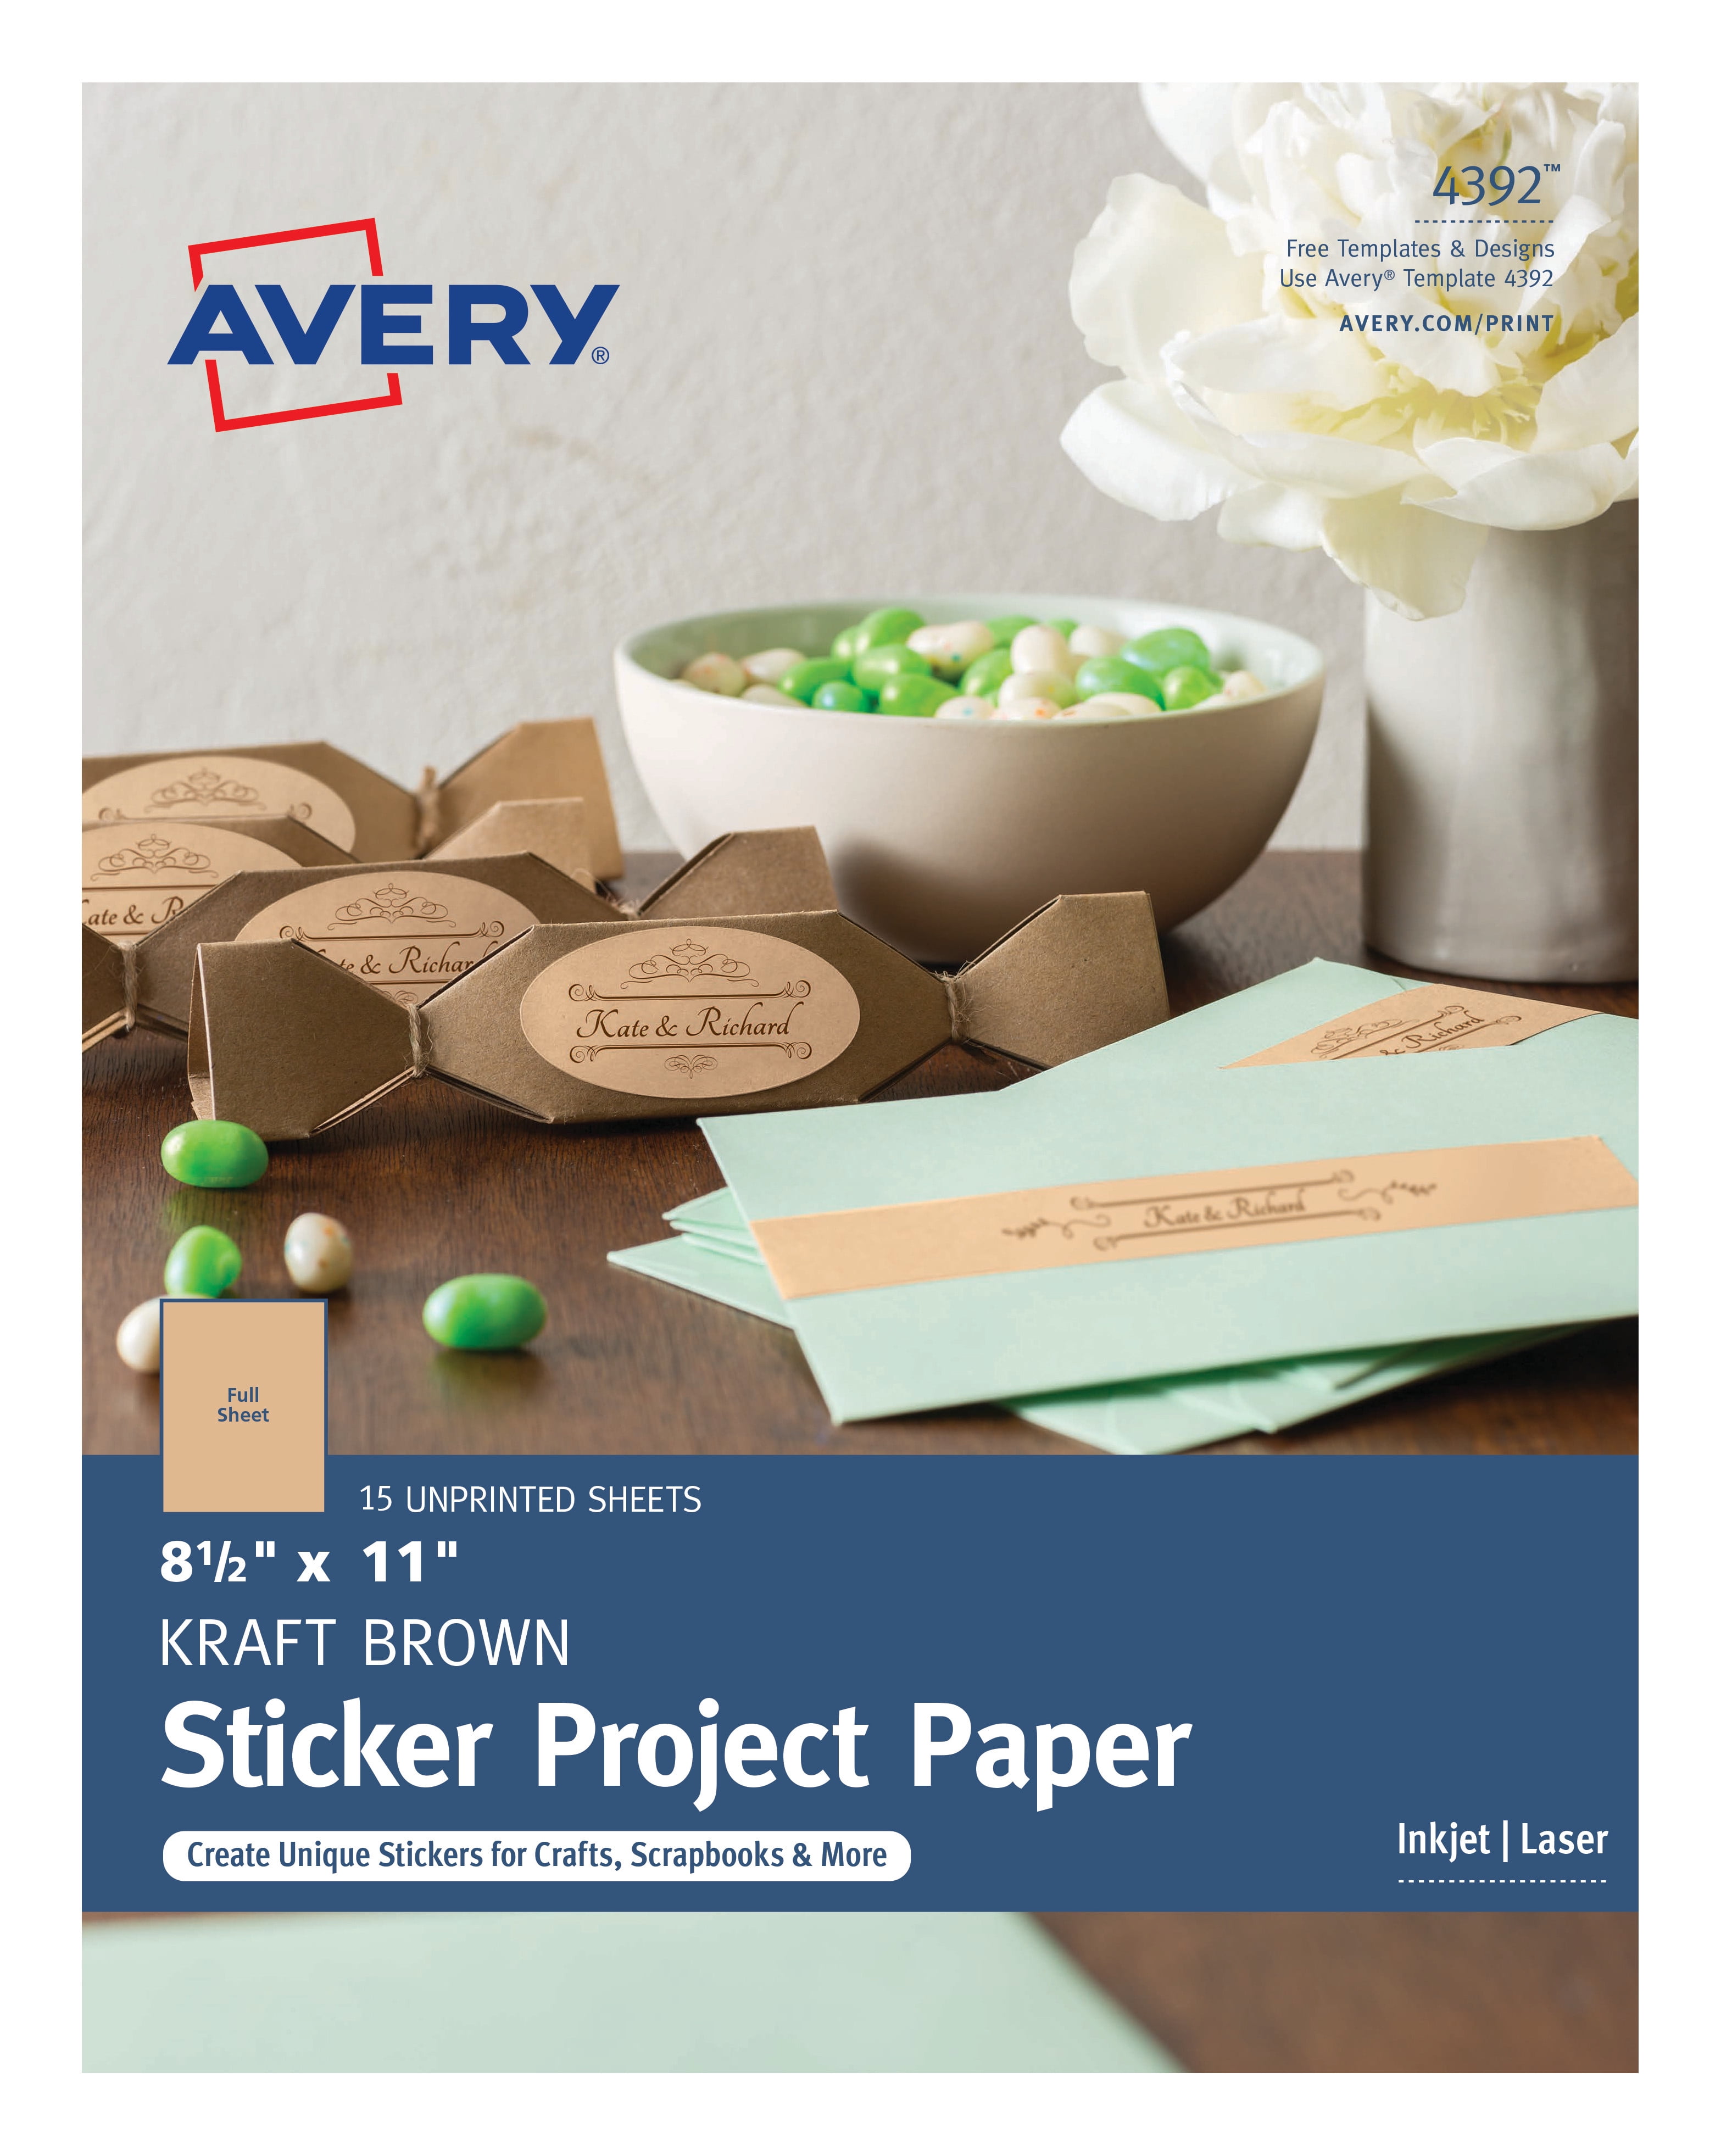 Avery Reinforcement Labels, 1/4 Diameter, Permanent Adhesive, Assorted  Metallic Colors, Non-Printable, 12 Packs, 3,360 Page Reinforcement Stickers  (21920)